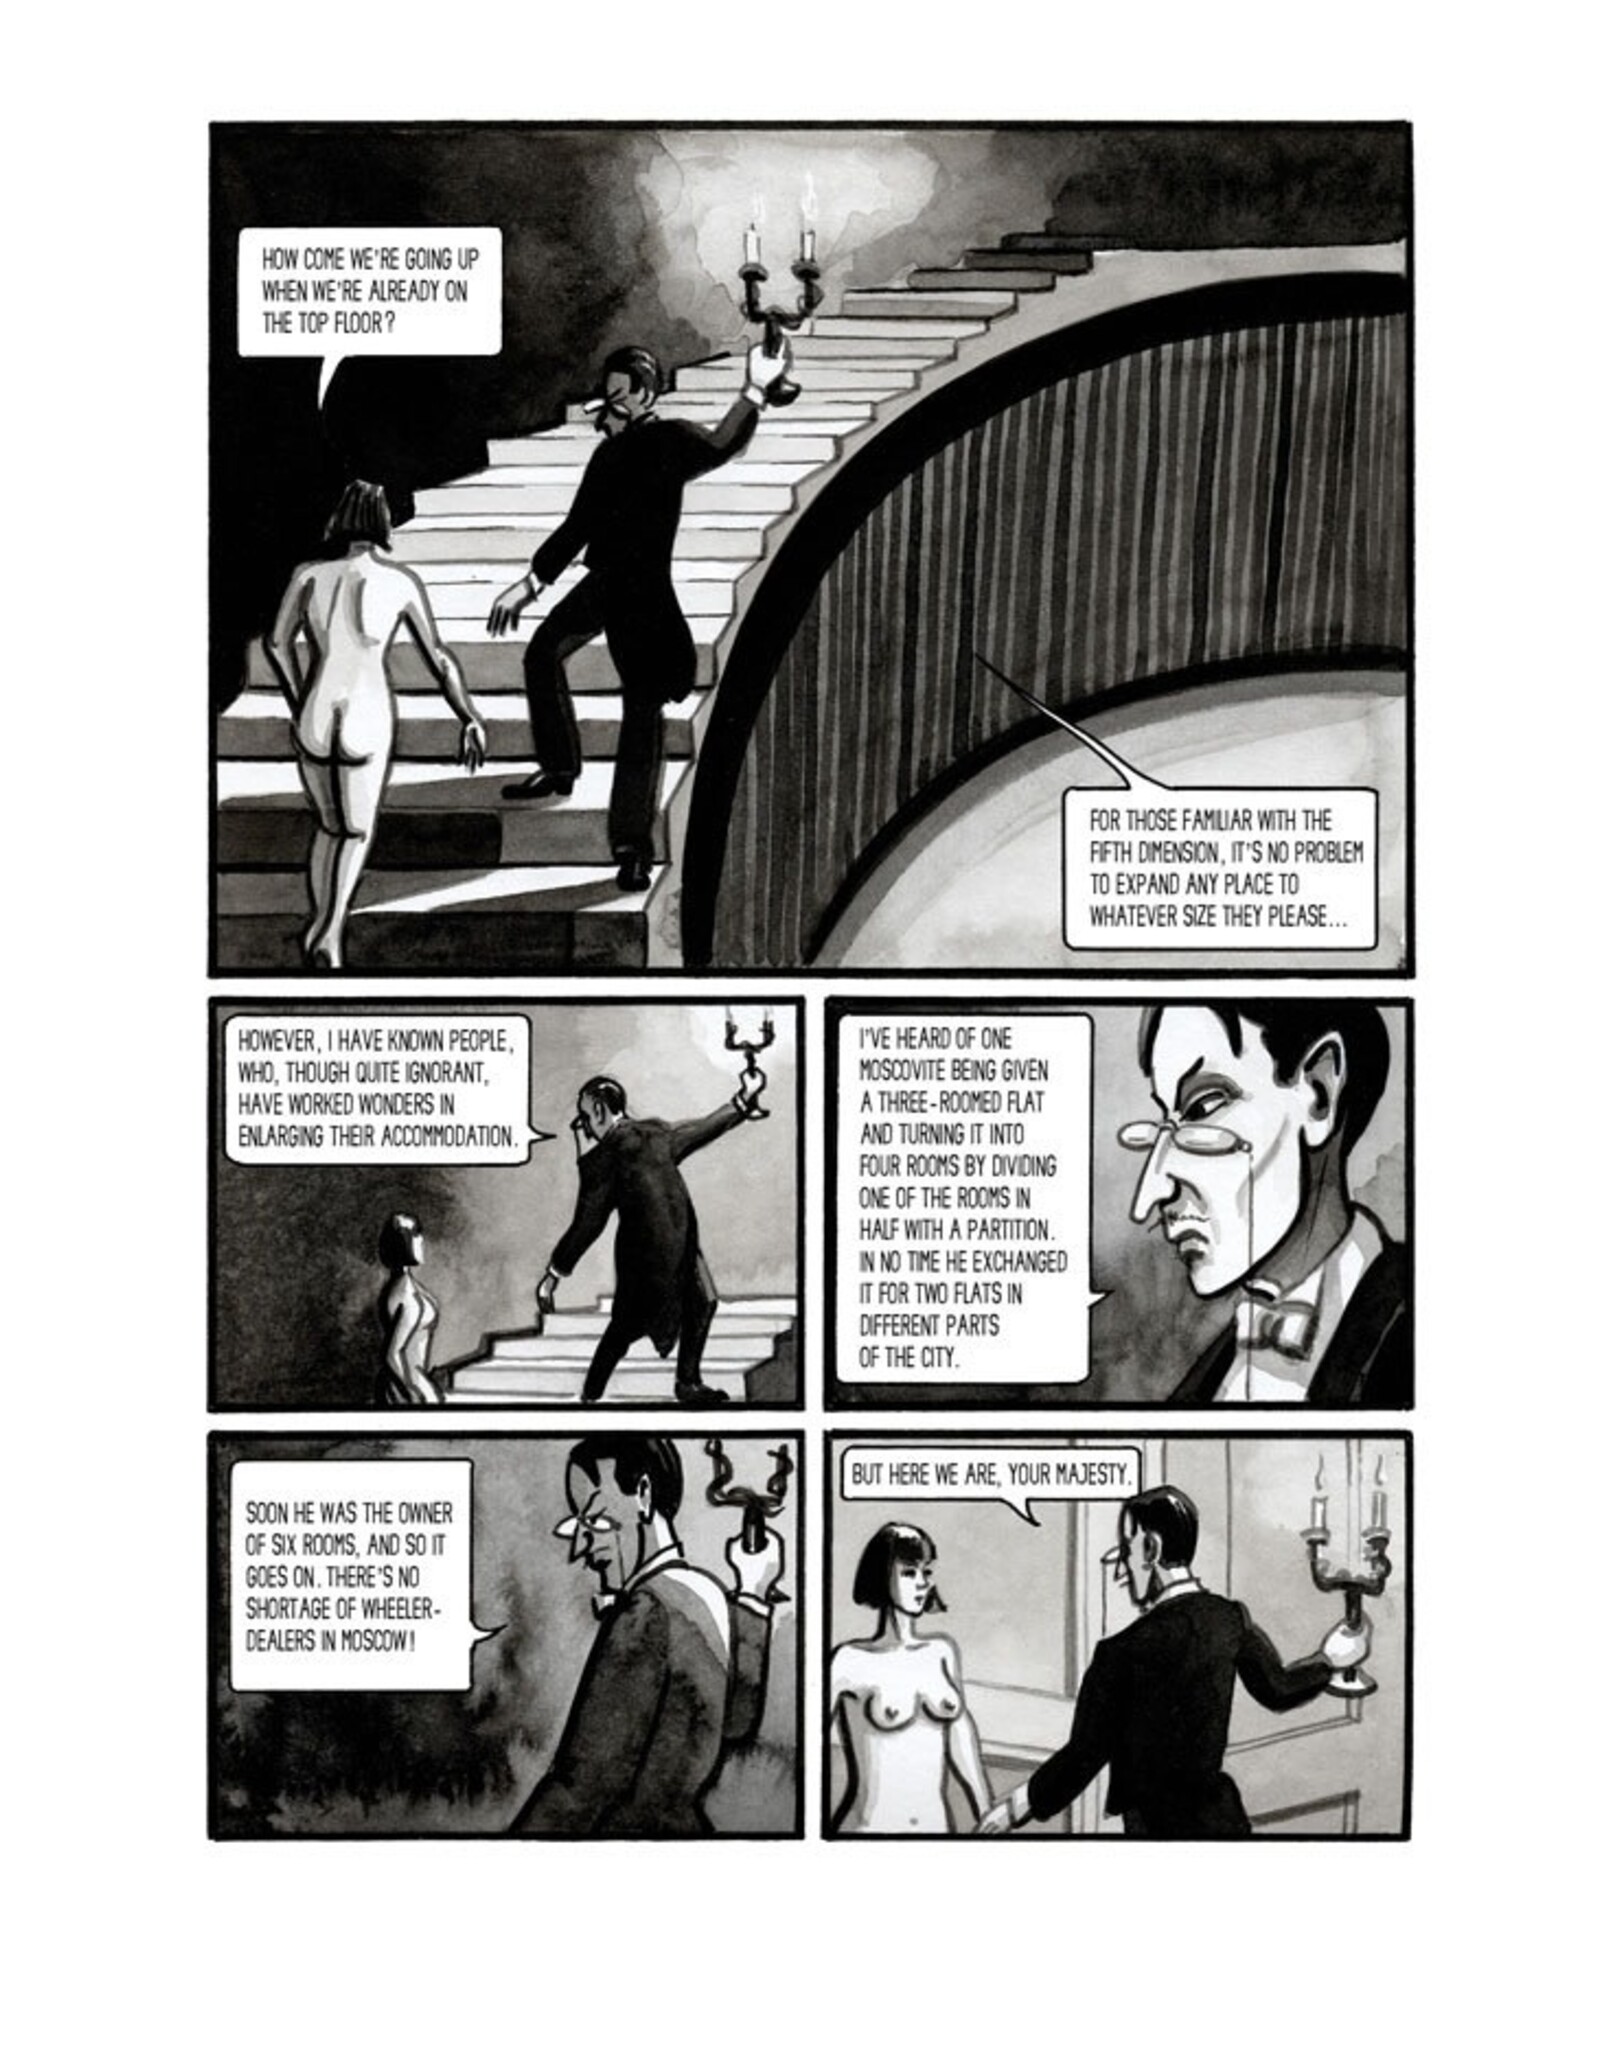 The Master and Margarita: A Graphic Novel